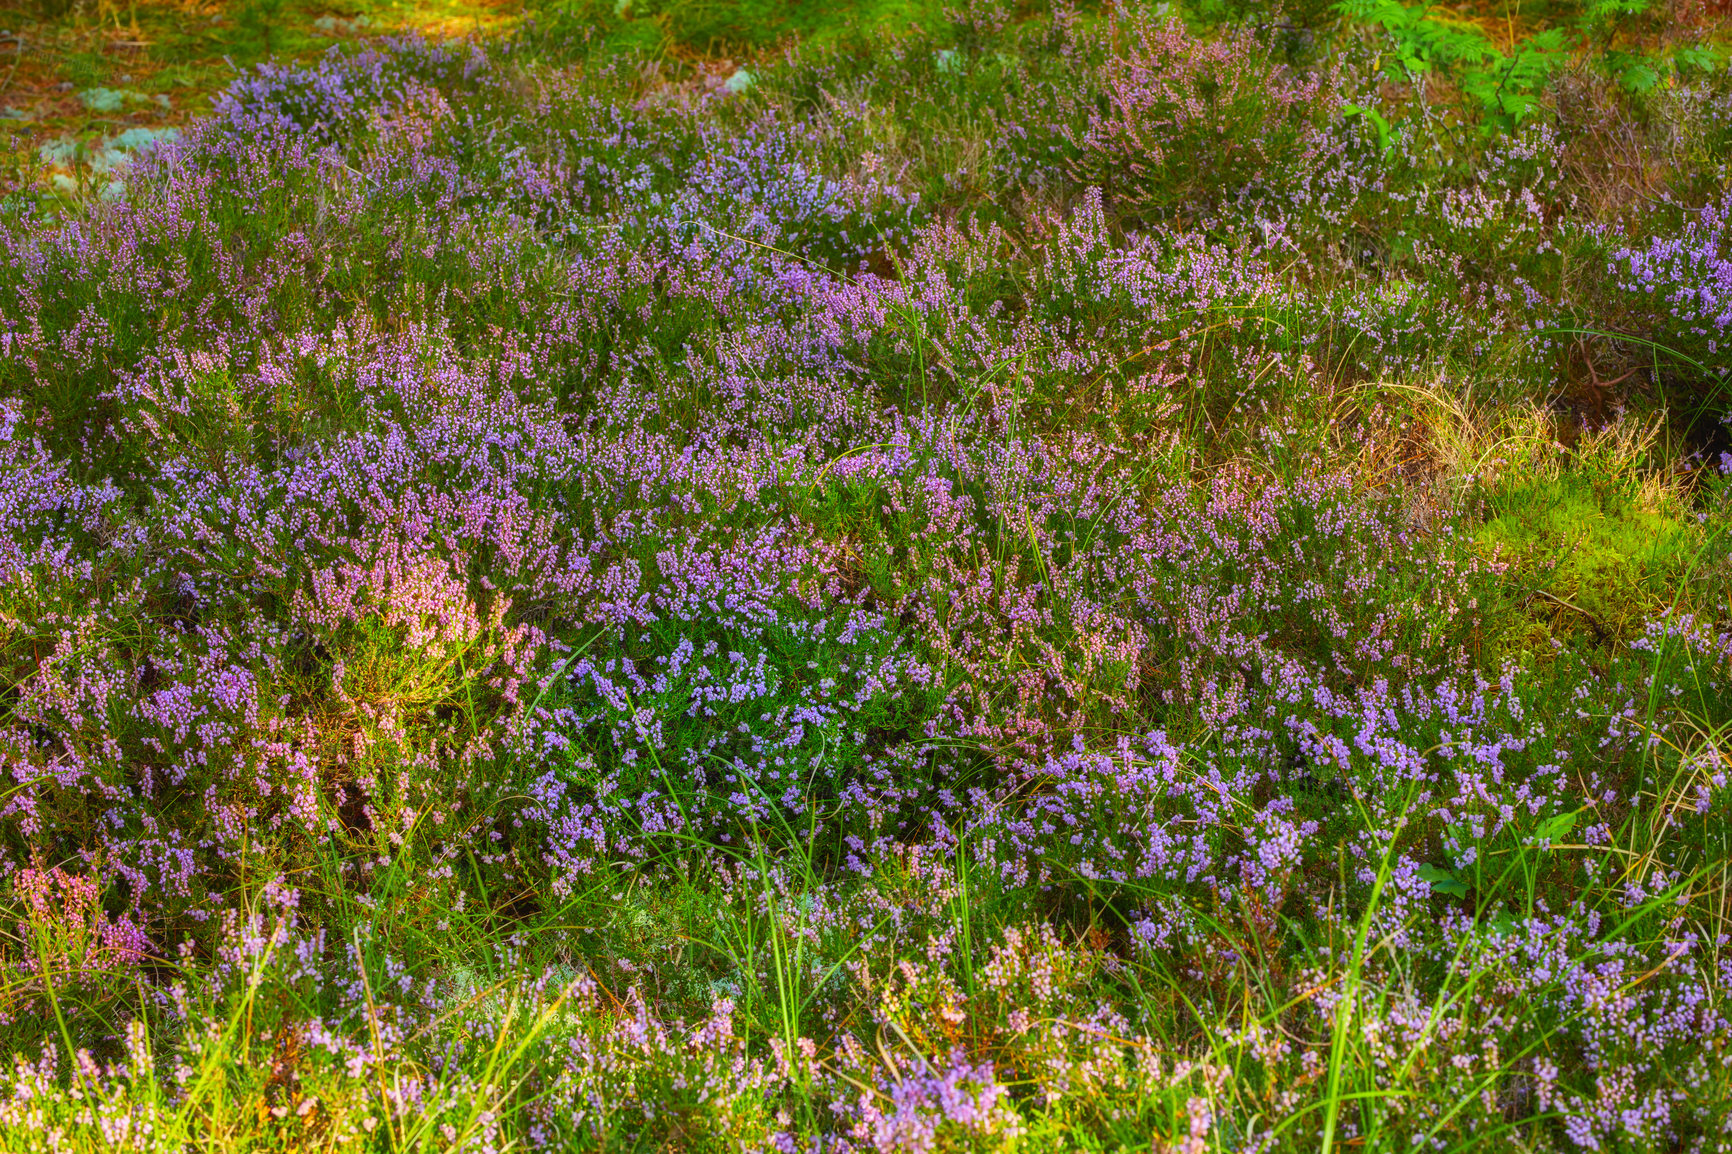 Buy stock photo Blooming heather growing in a wild forest. Beautiful landscape of purple flowers flourishing in grass in nature. Scenic view of lush green vegetation in an uncultivated environment during spring